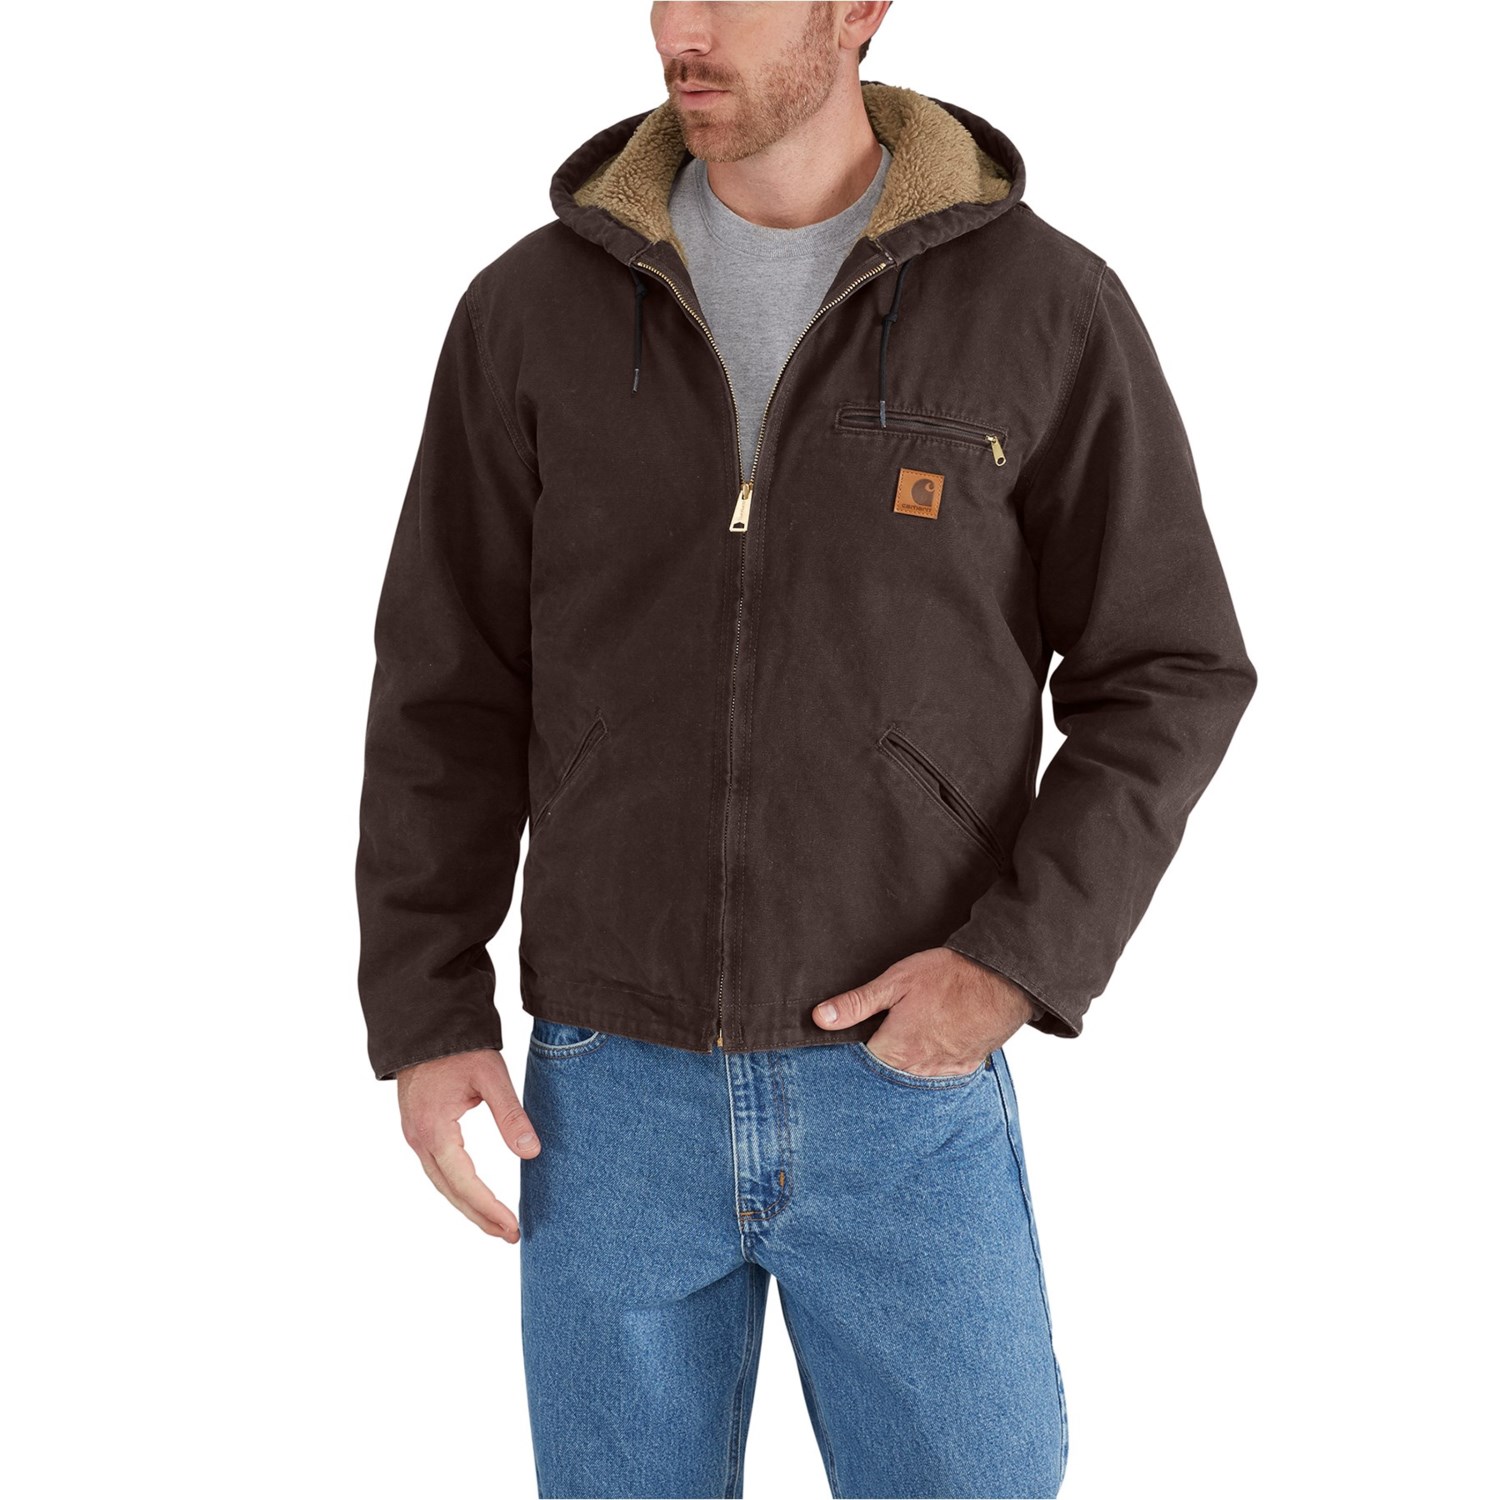 Carhartt J141 Sierra Sherpa-Lined Jacket (For Big and Tall Men)